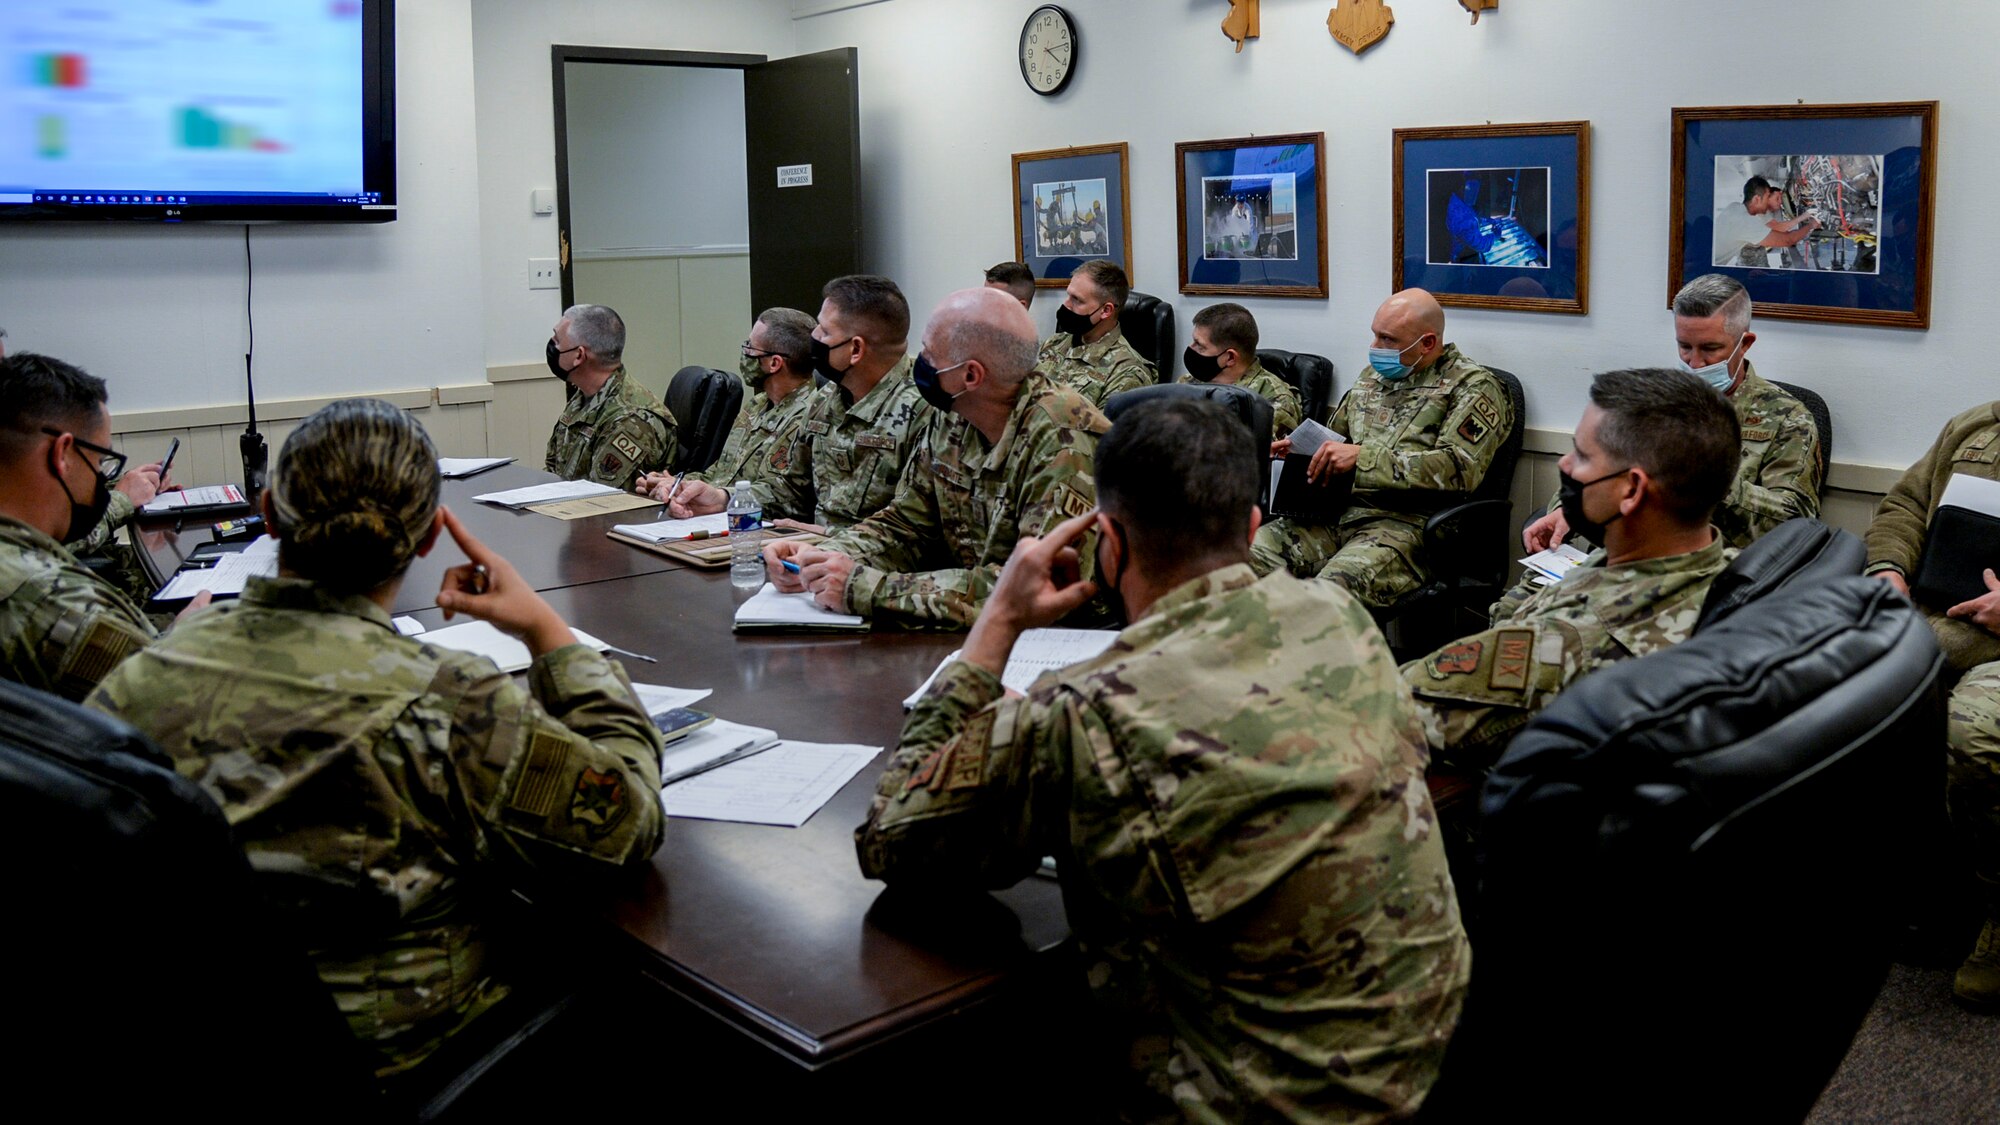 An image of The U.S. Air National Guard's first Production Assessment Team attending a meeting with members of the 177th Fighter Wing